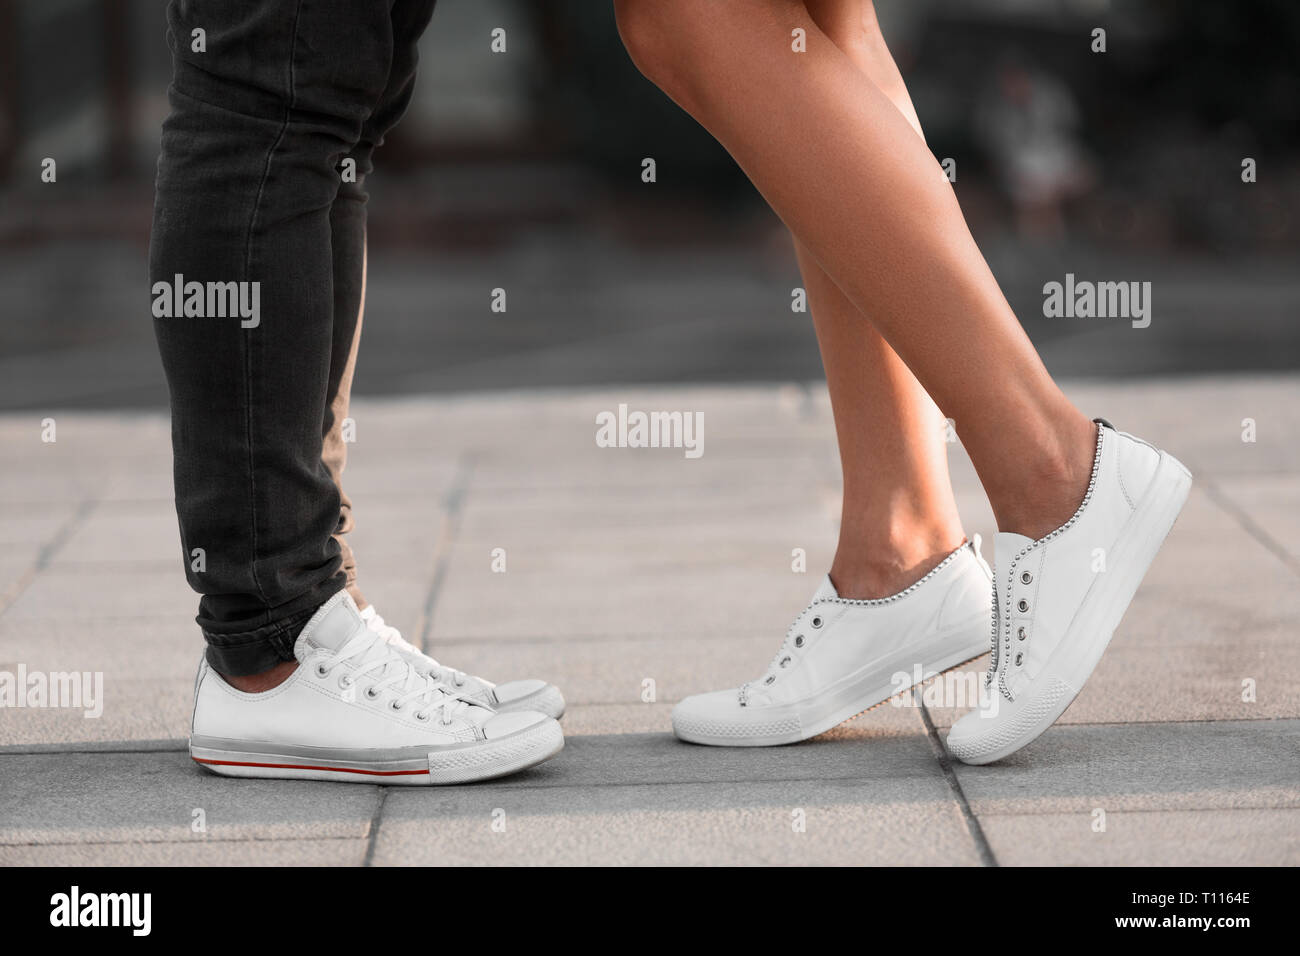 Male and female legs during date, couple kissing in city Stock Photo